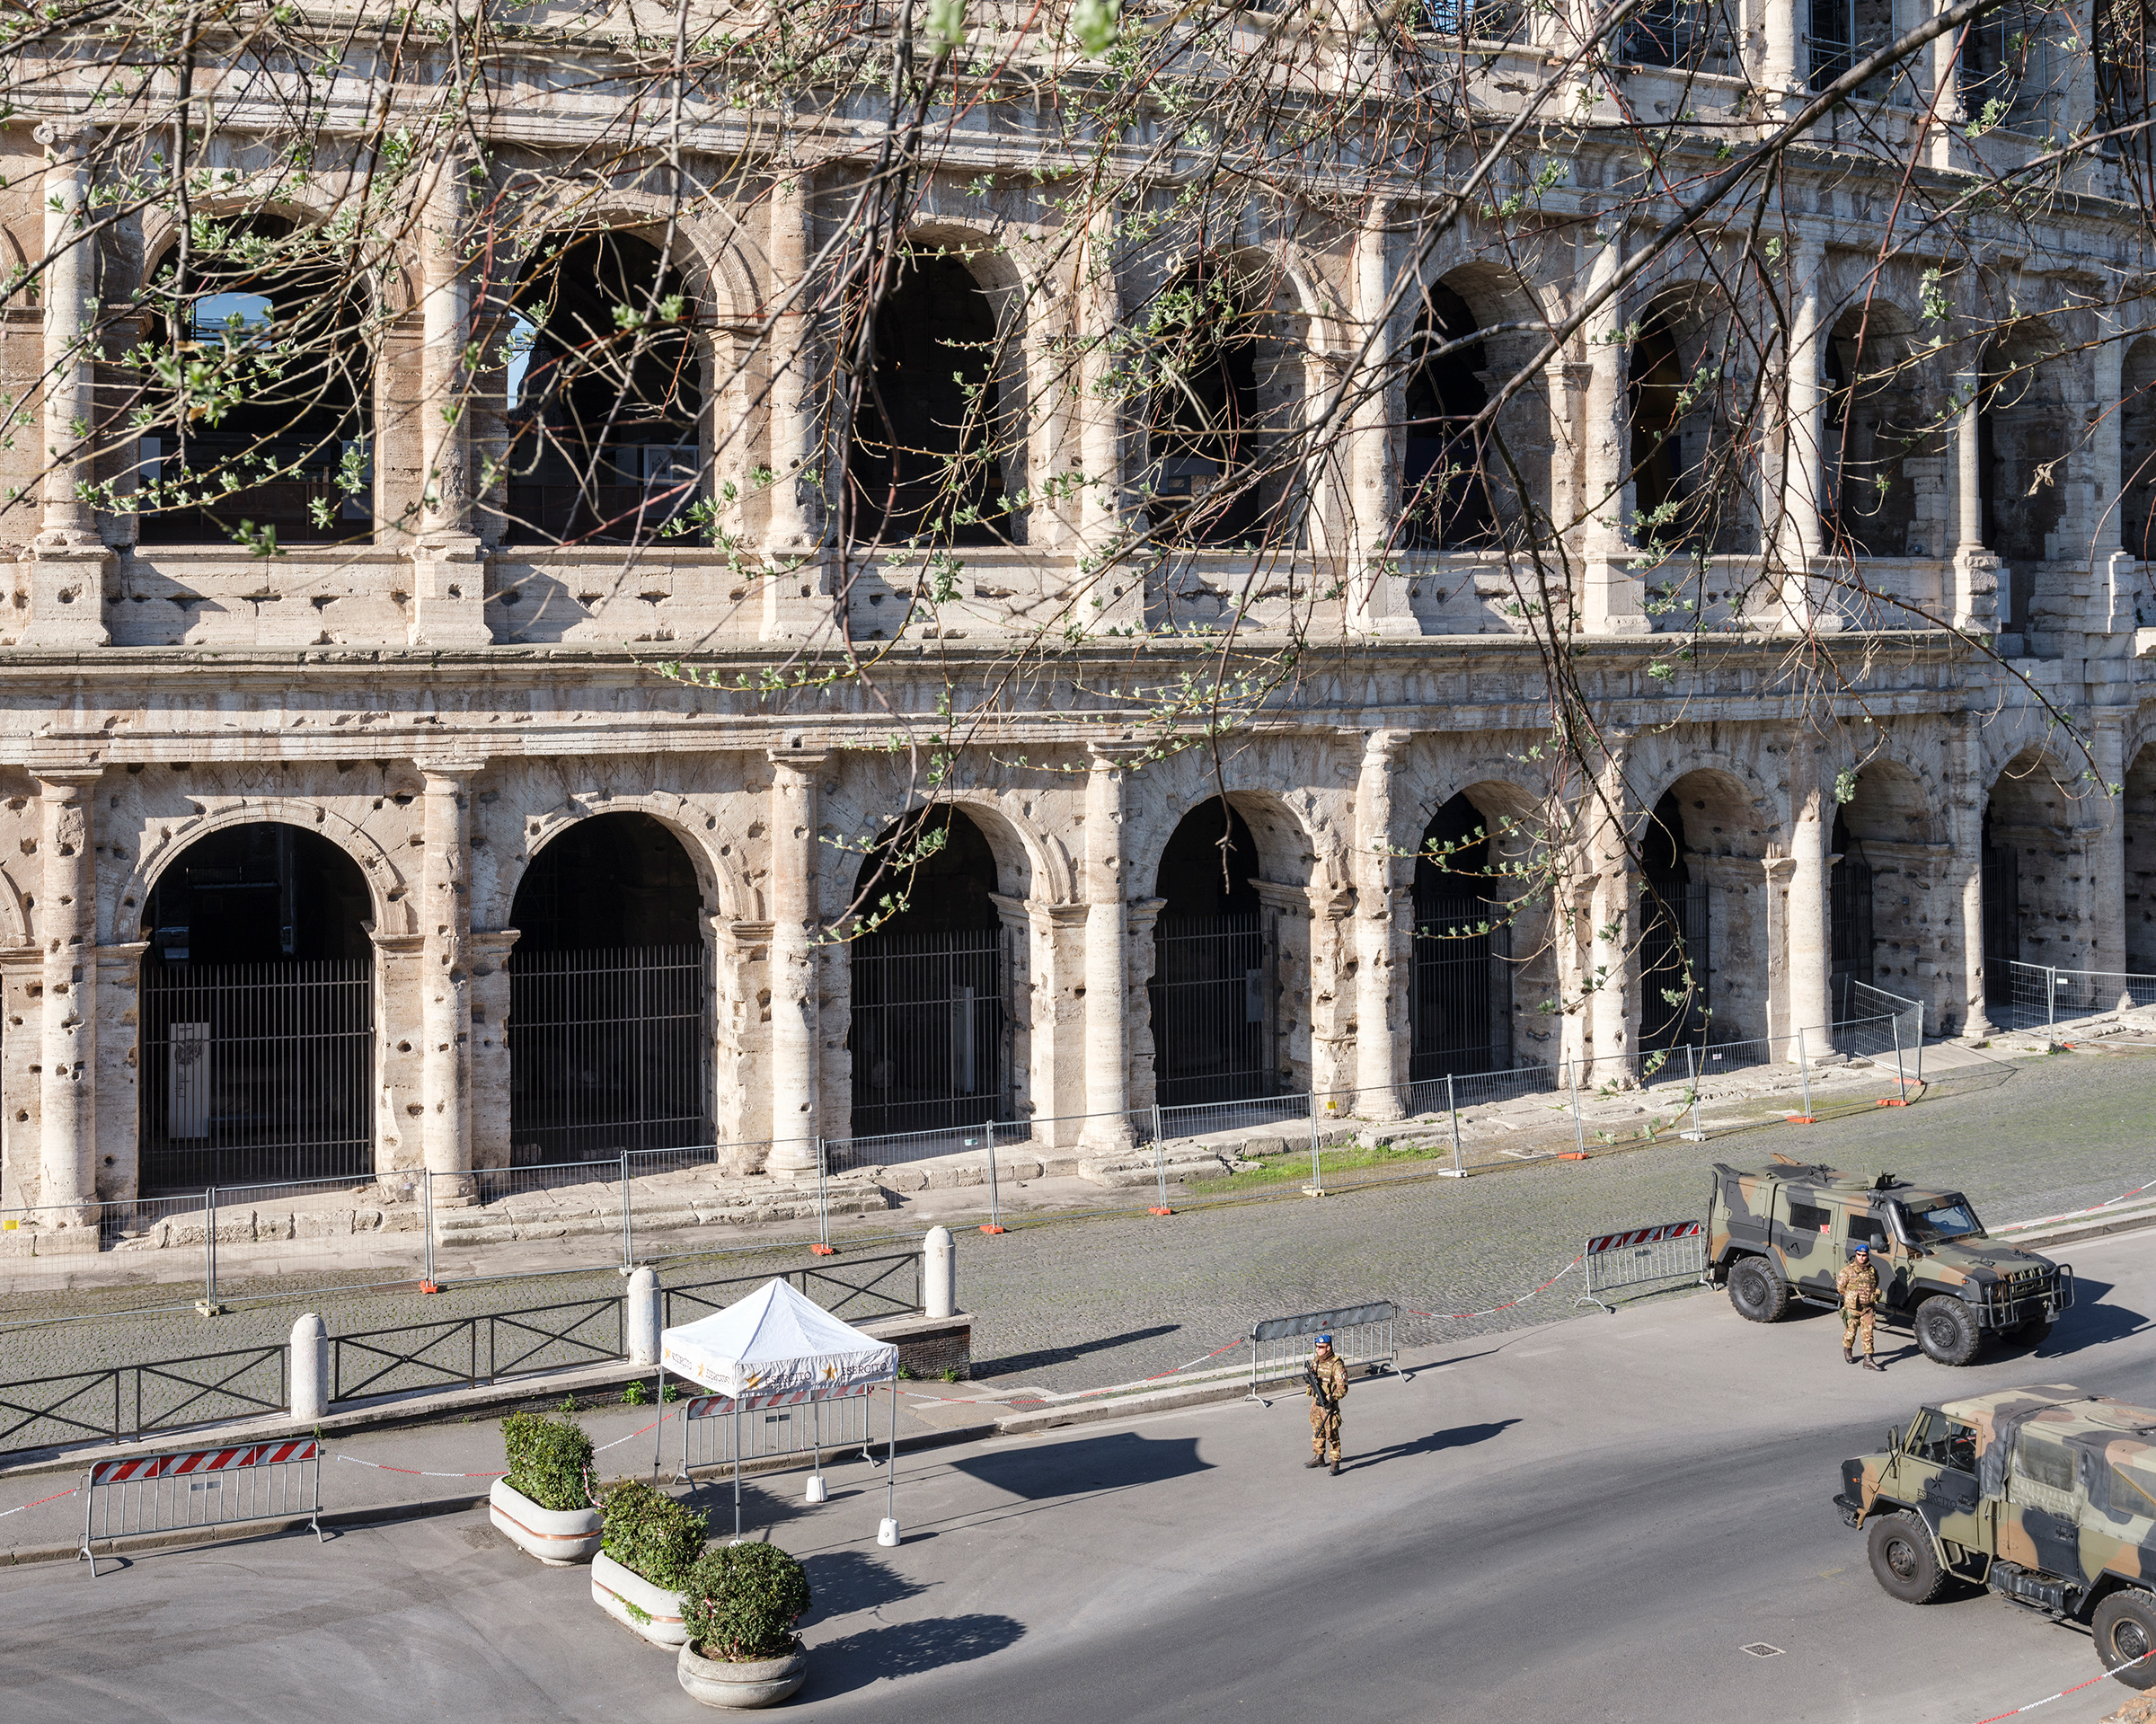 A military checkpoint outside the Colosseum in Rome.